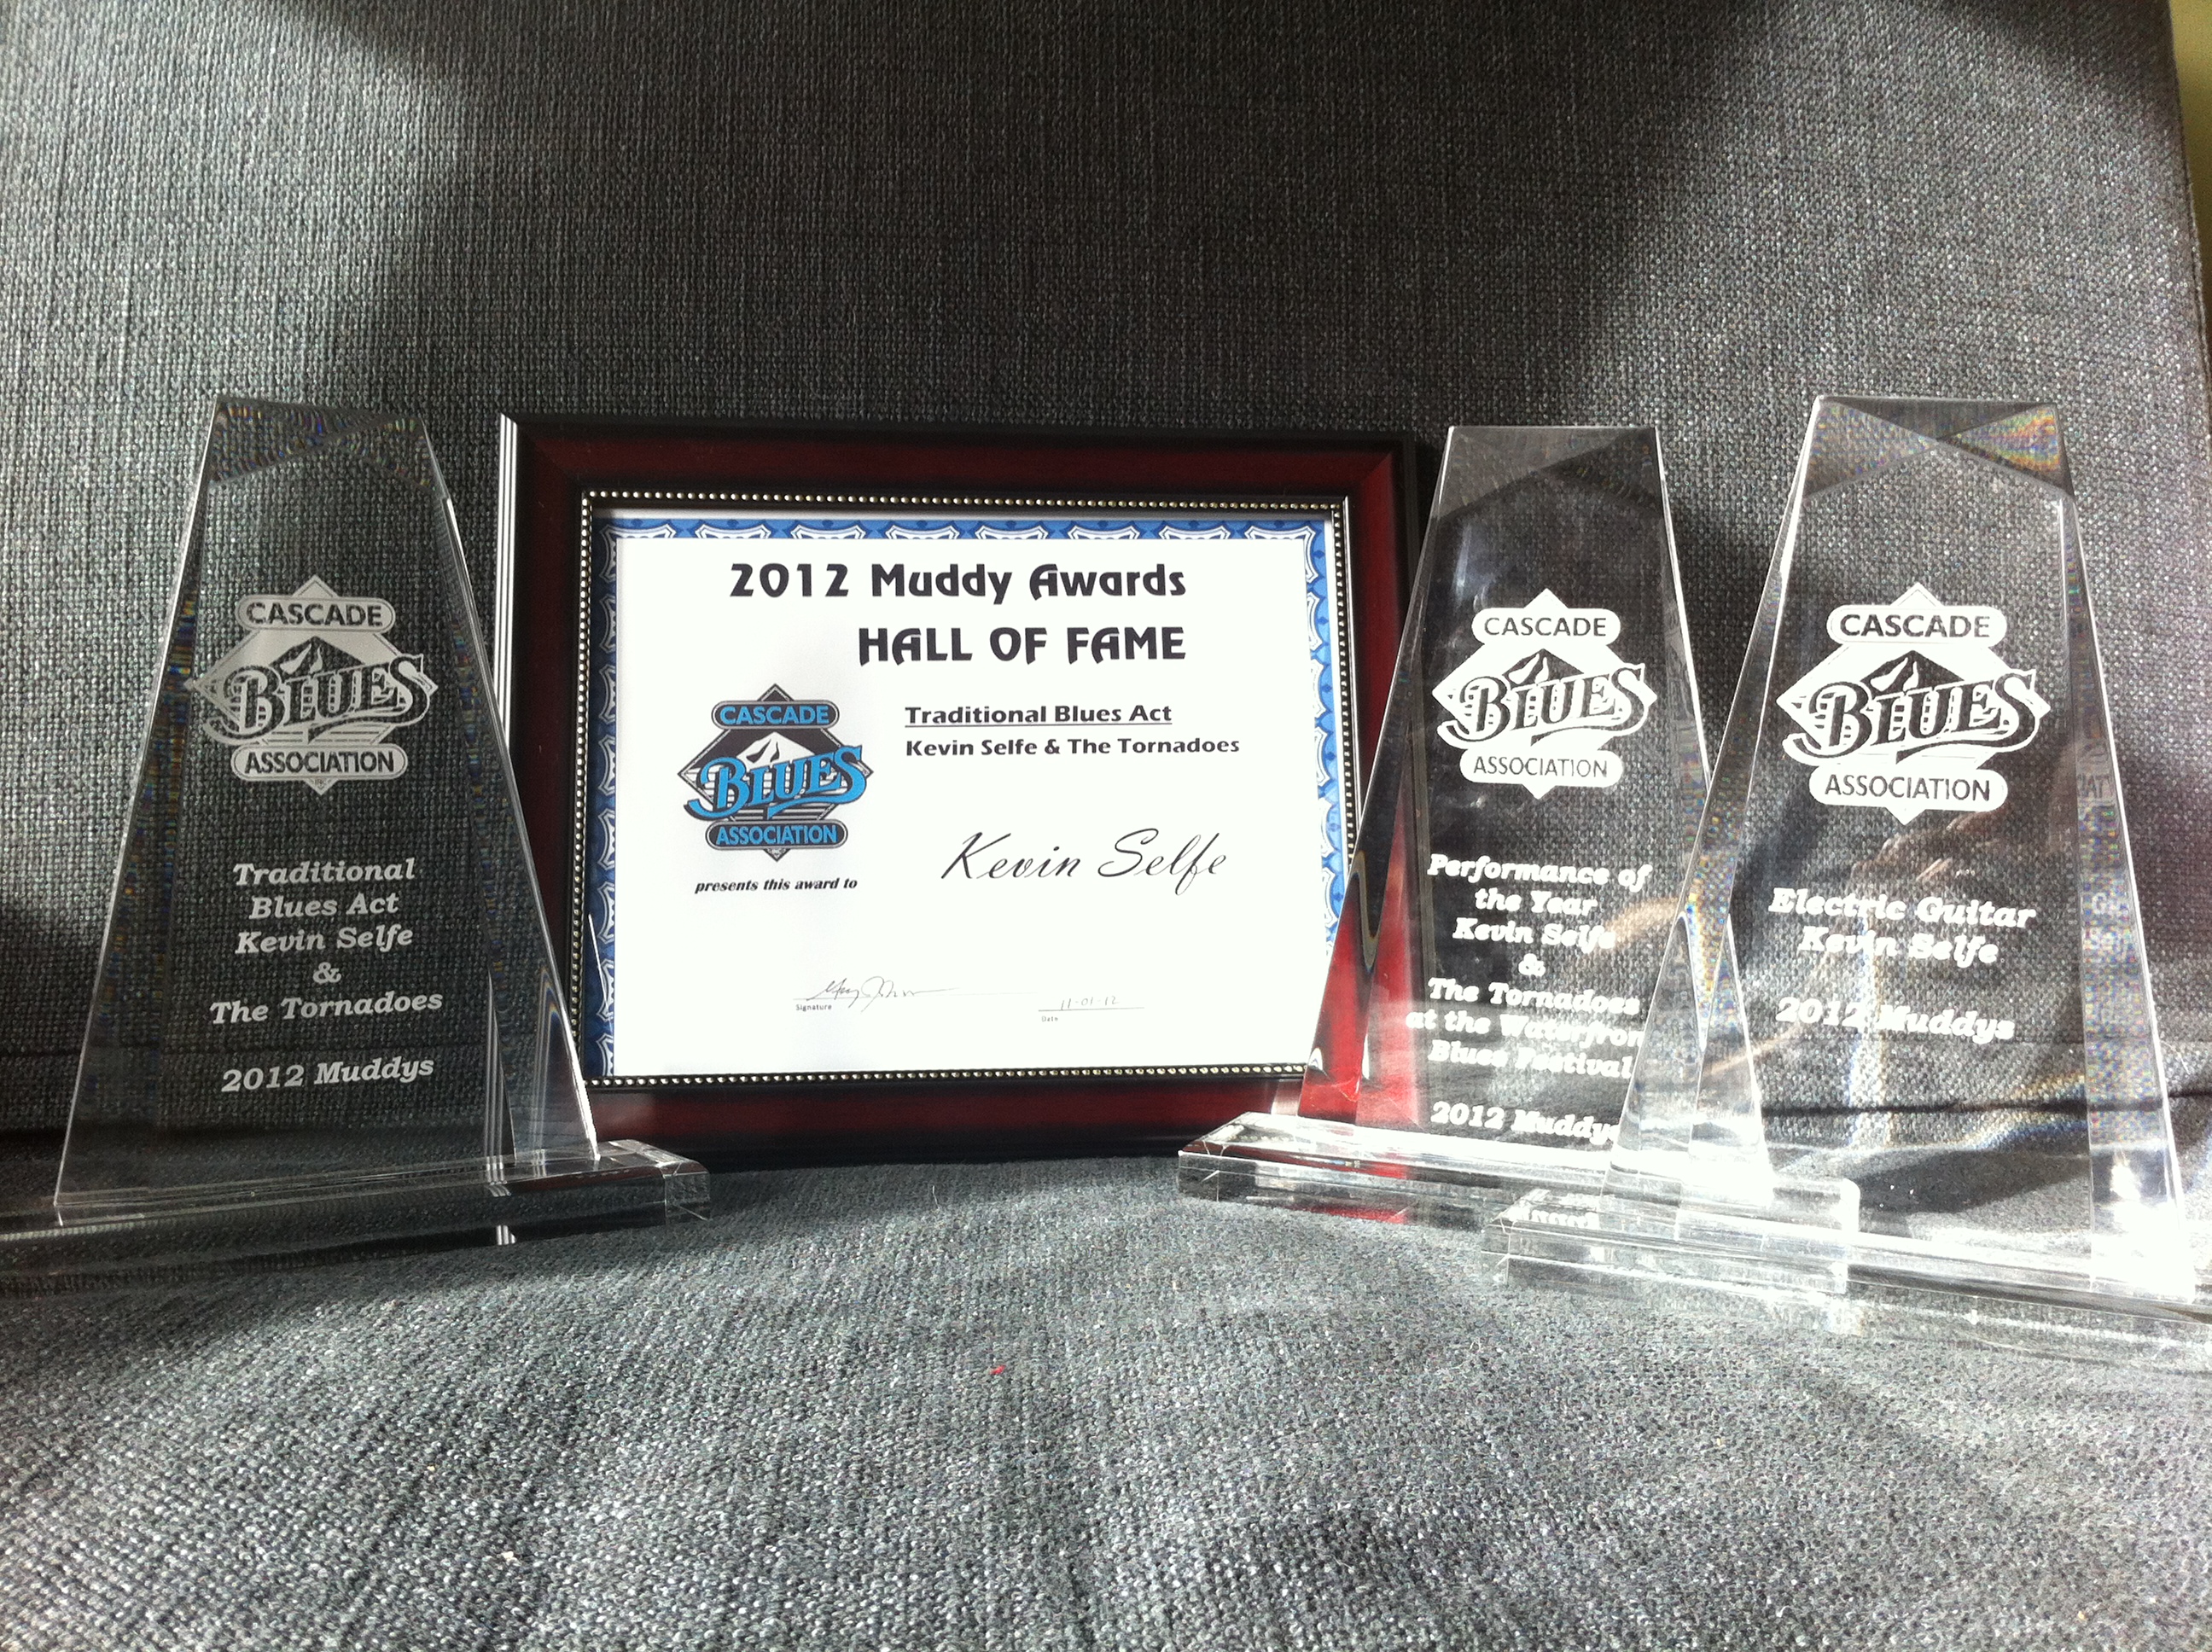 Kevin Selfe and The Tornadoes take home four Muddy Awards, inducted into the Hall of Fame!